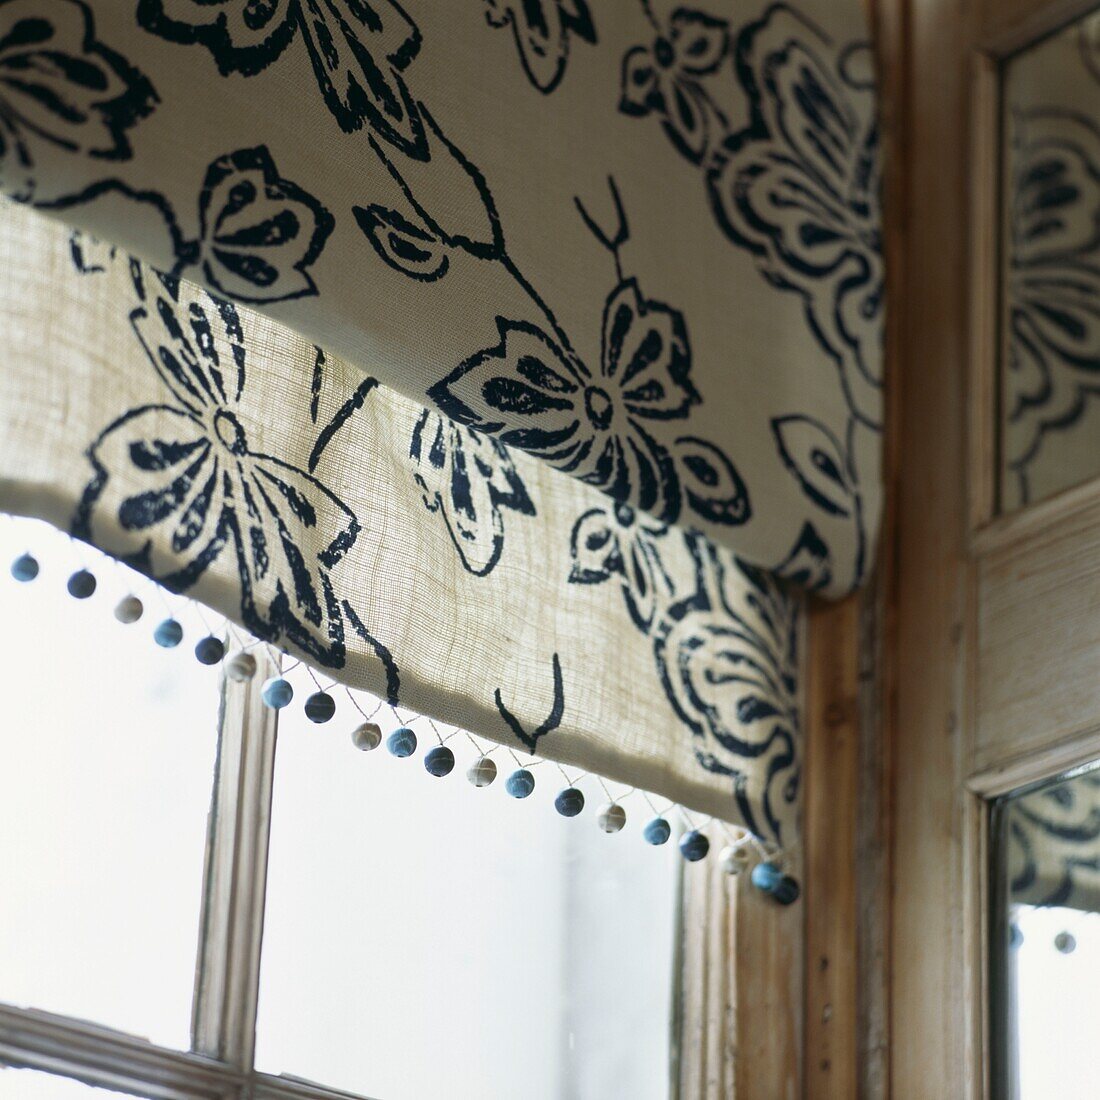 Floral patterned roman blind at window